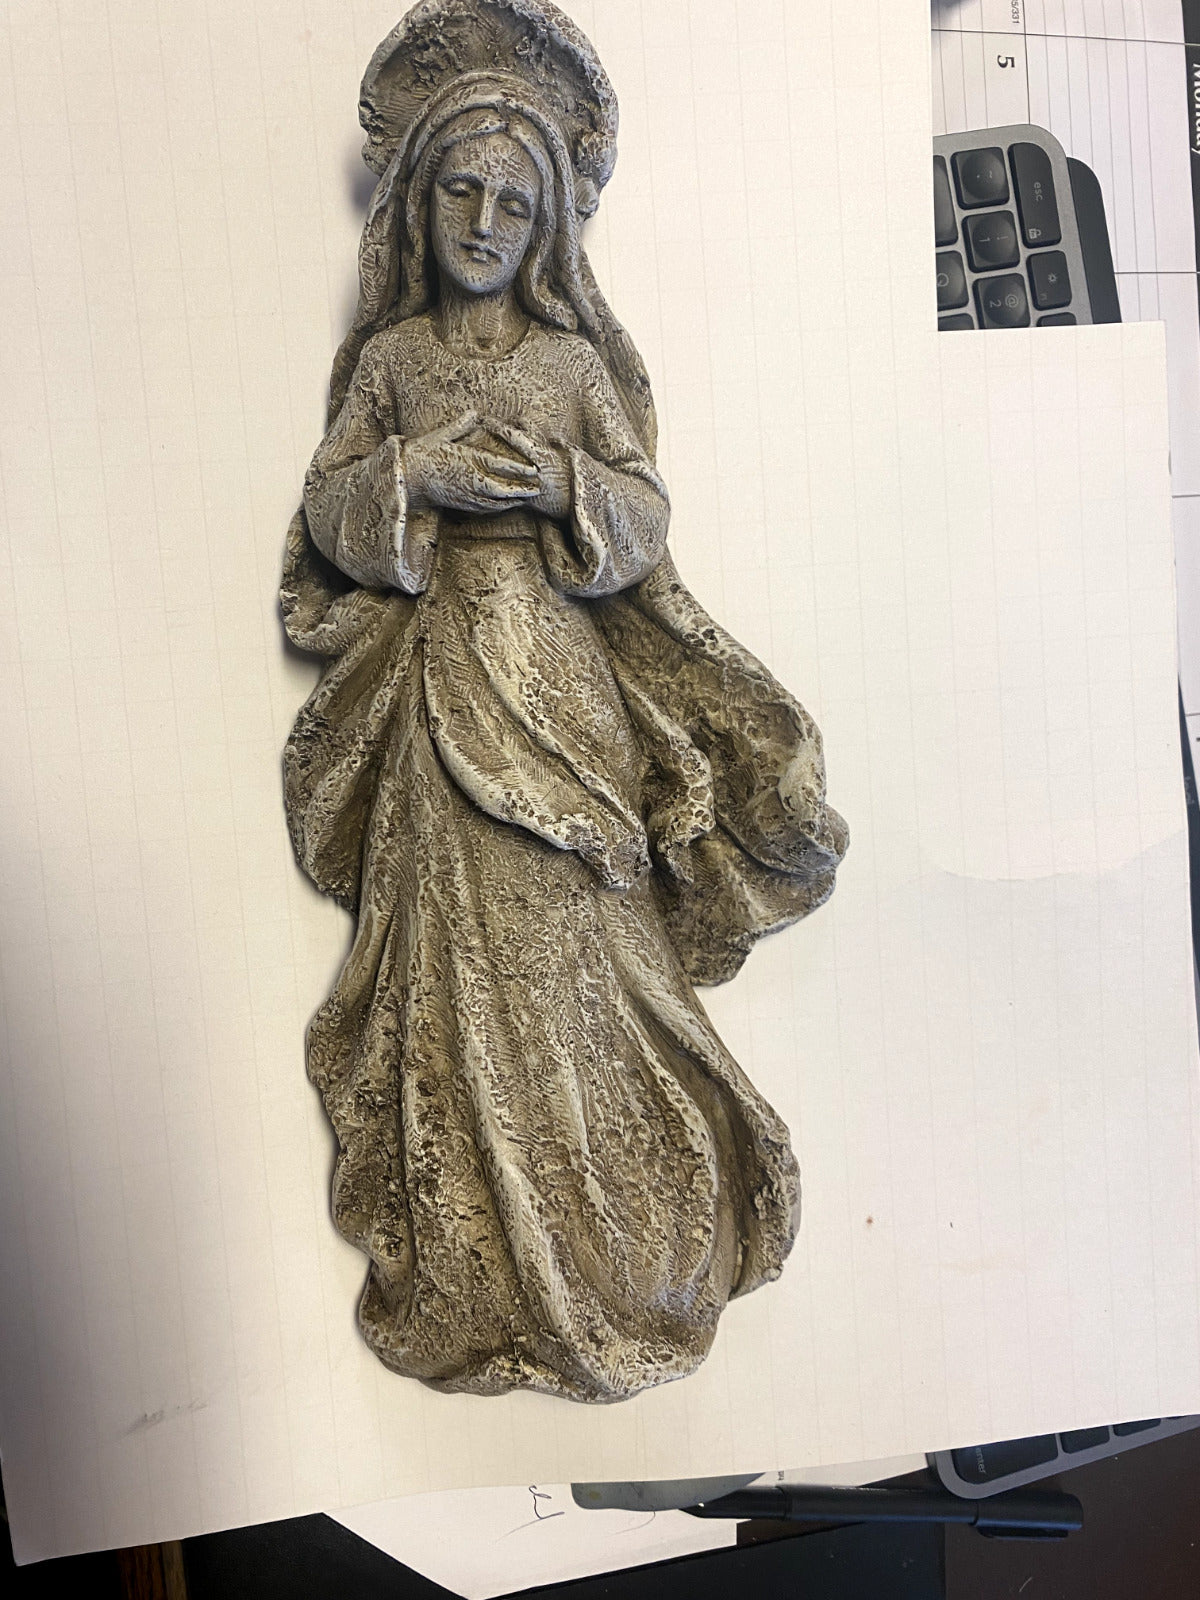 "Our Lady of Love" / Blessed Mother  14"  Plaque/Statue, New - Bob and Penny Lord